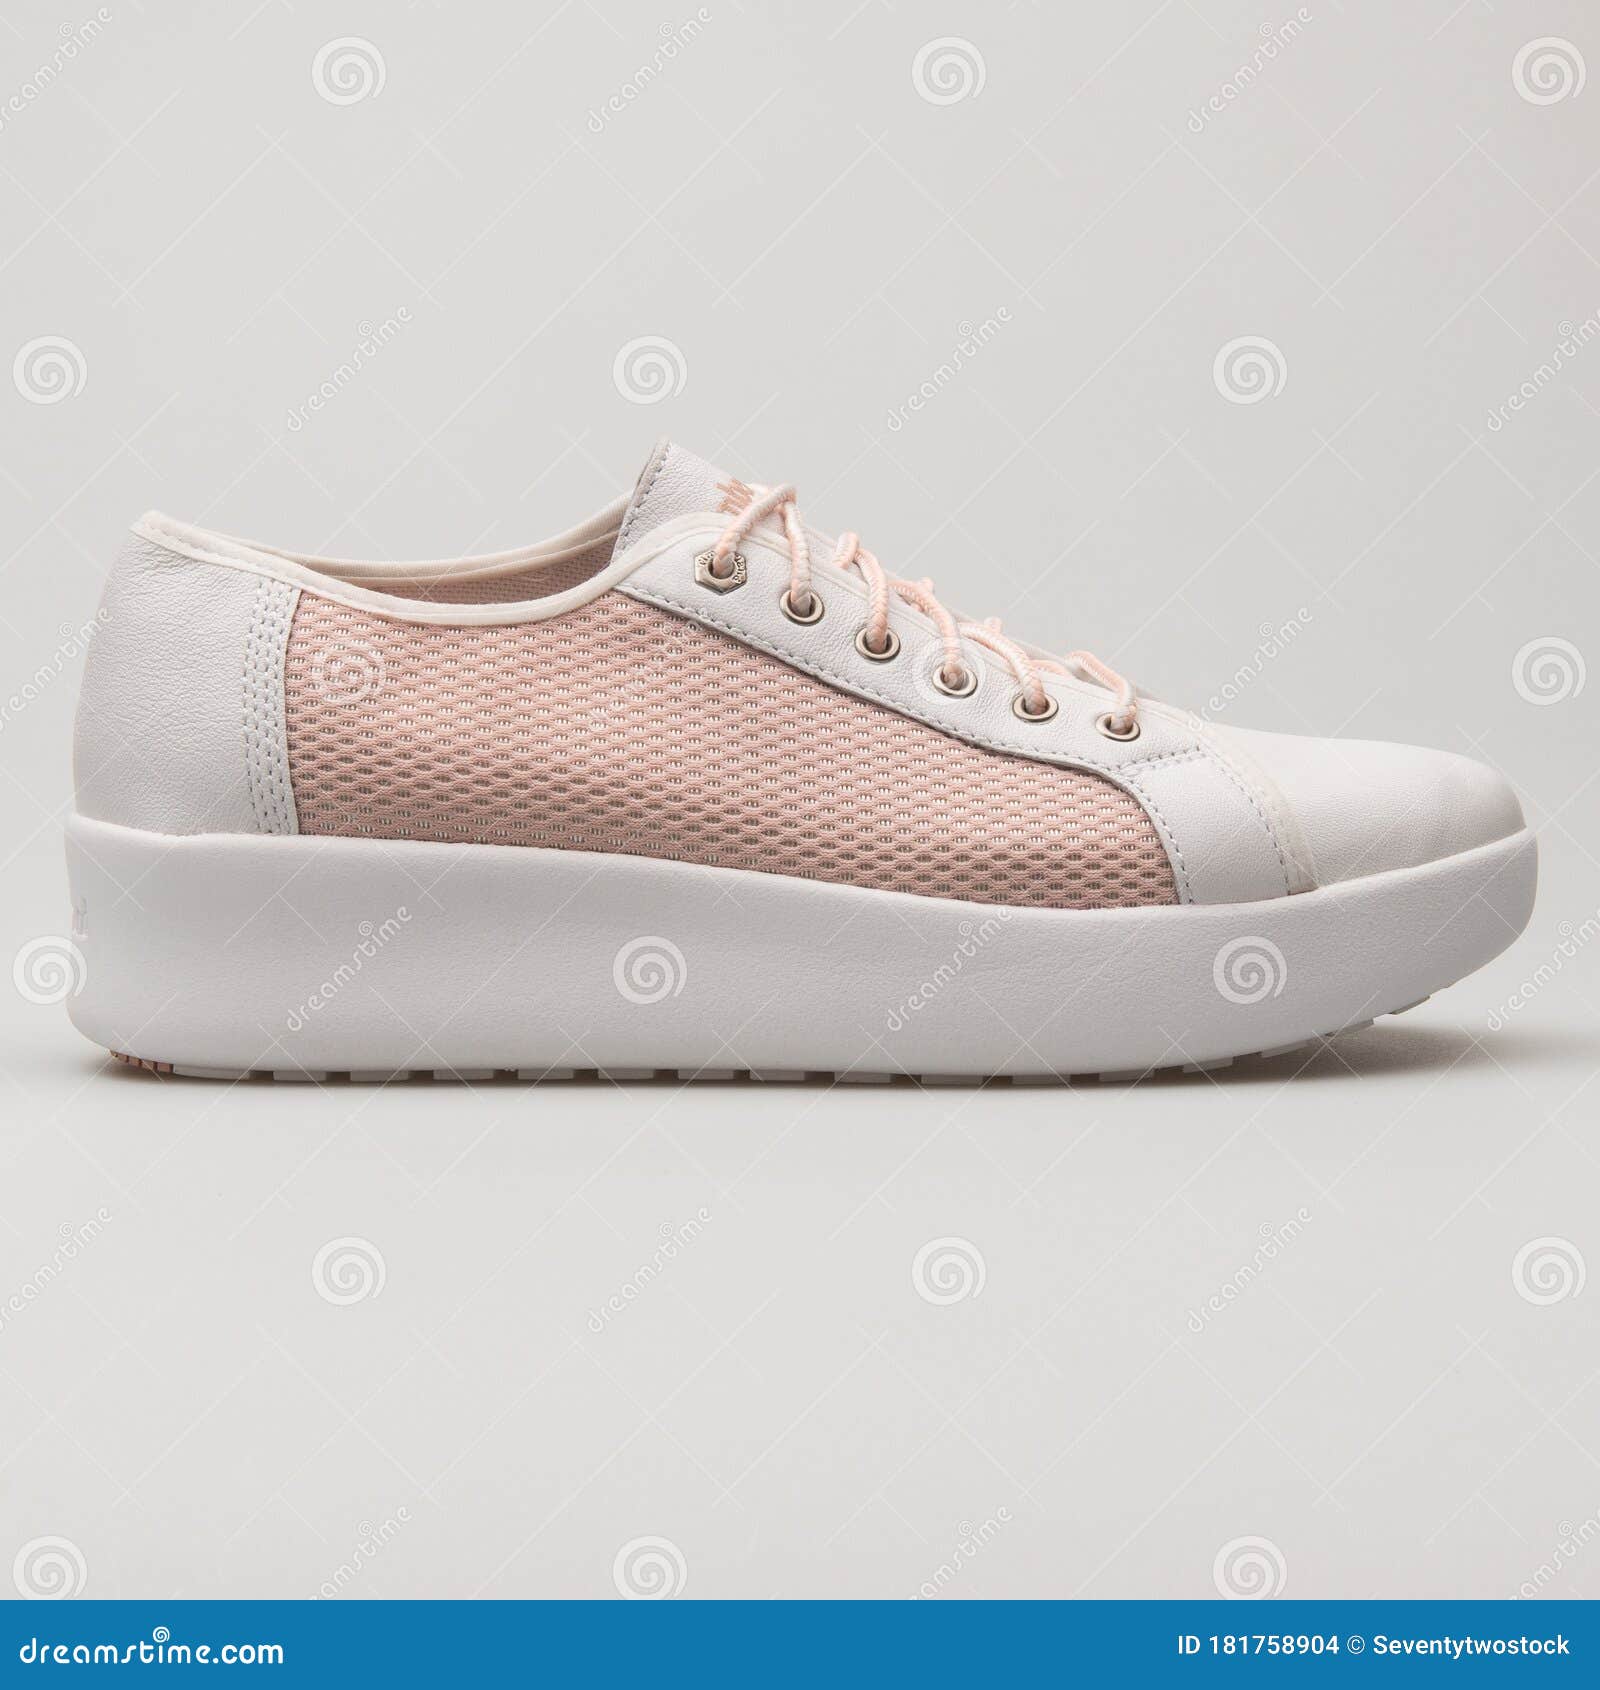 Timberland Berlin Park OX White Rose Sneaker Editorial Stock Image - Image of sneakers, side: 181758904